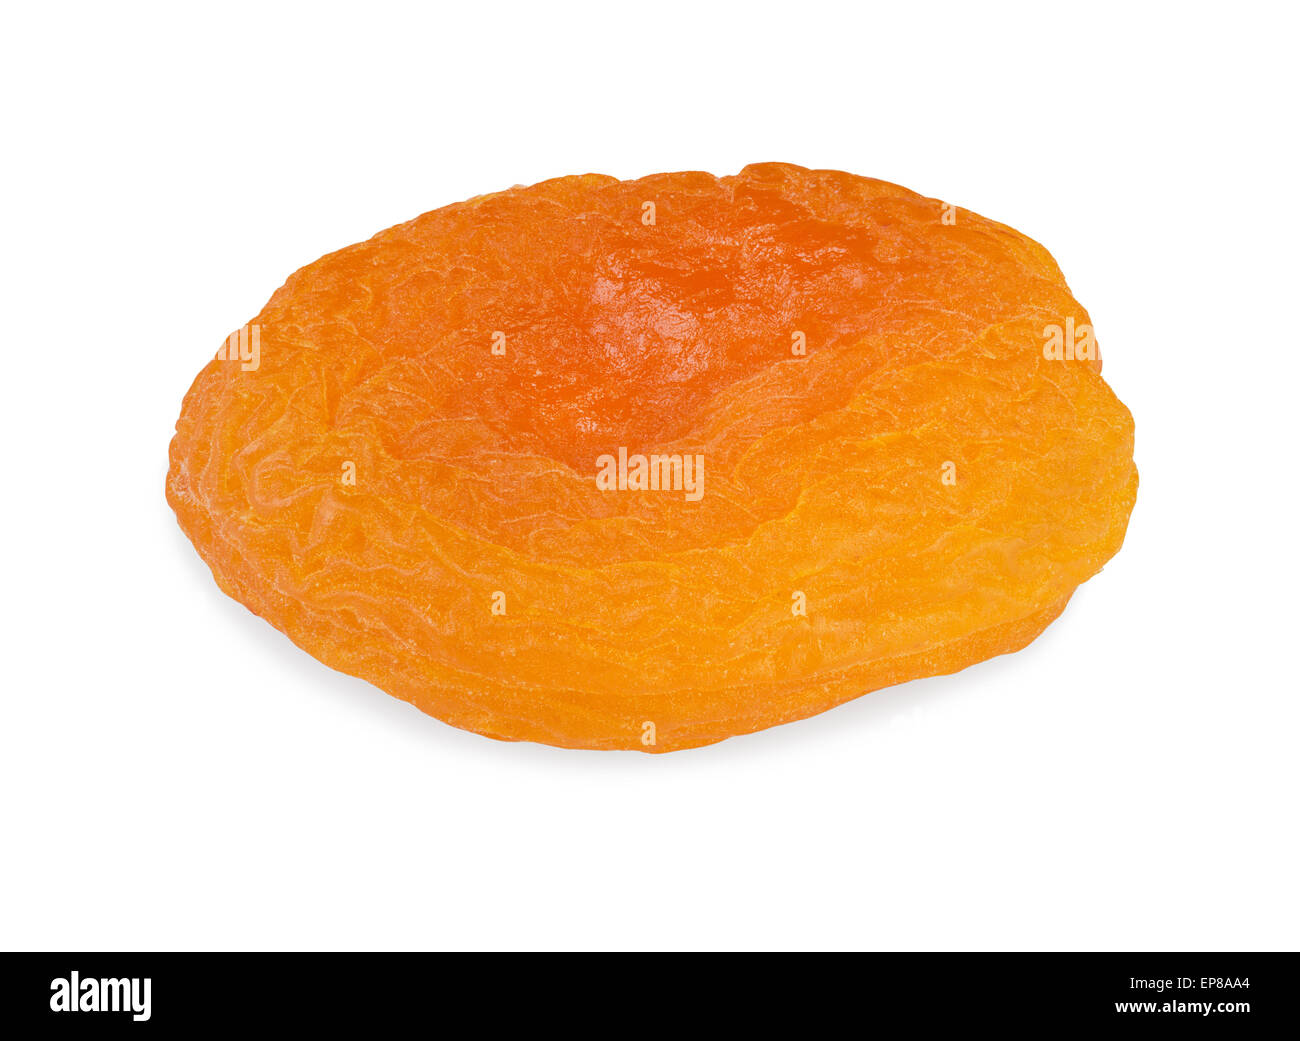 Dried pitted apricot isolated on a white background Stock Photo